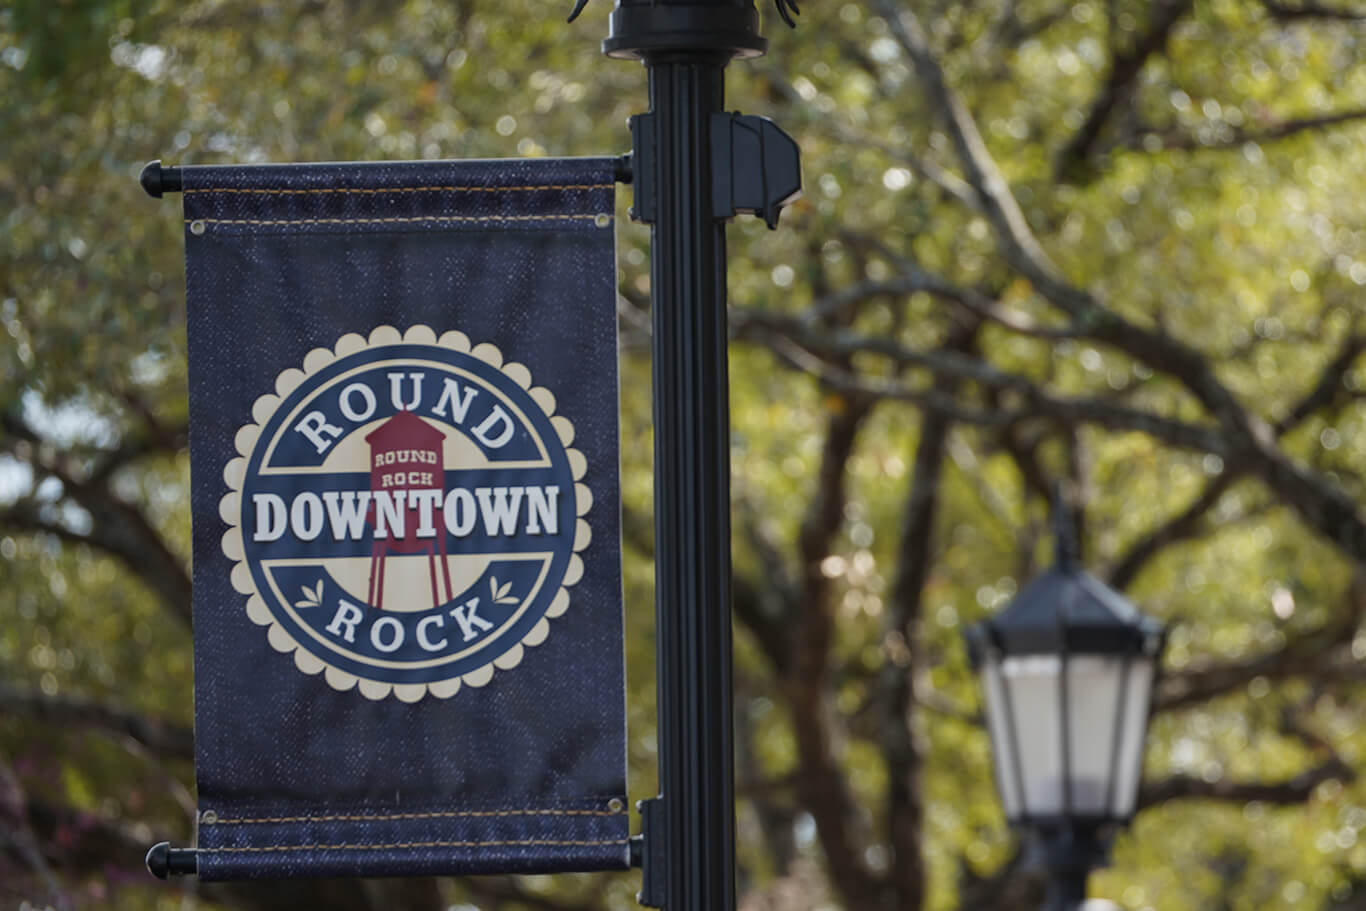 An image of a street pole with a banner showing the Downtown Round Rock logo.